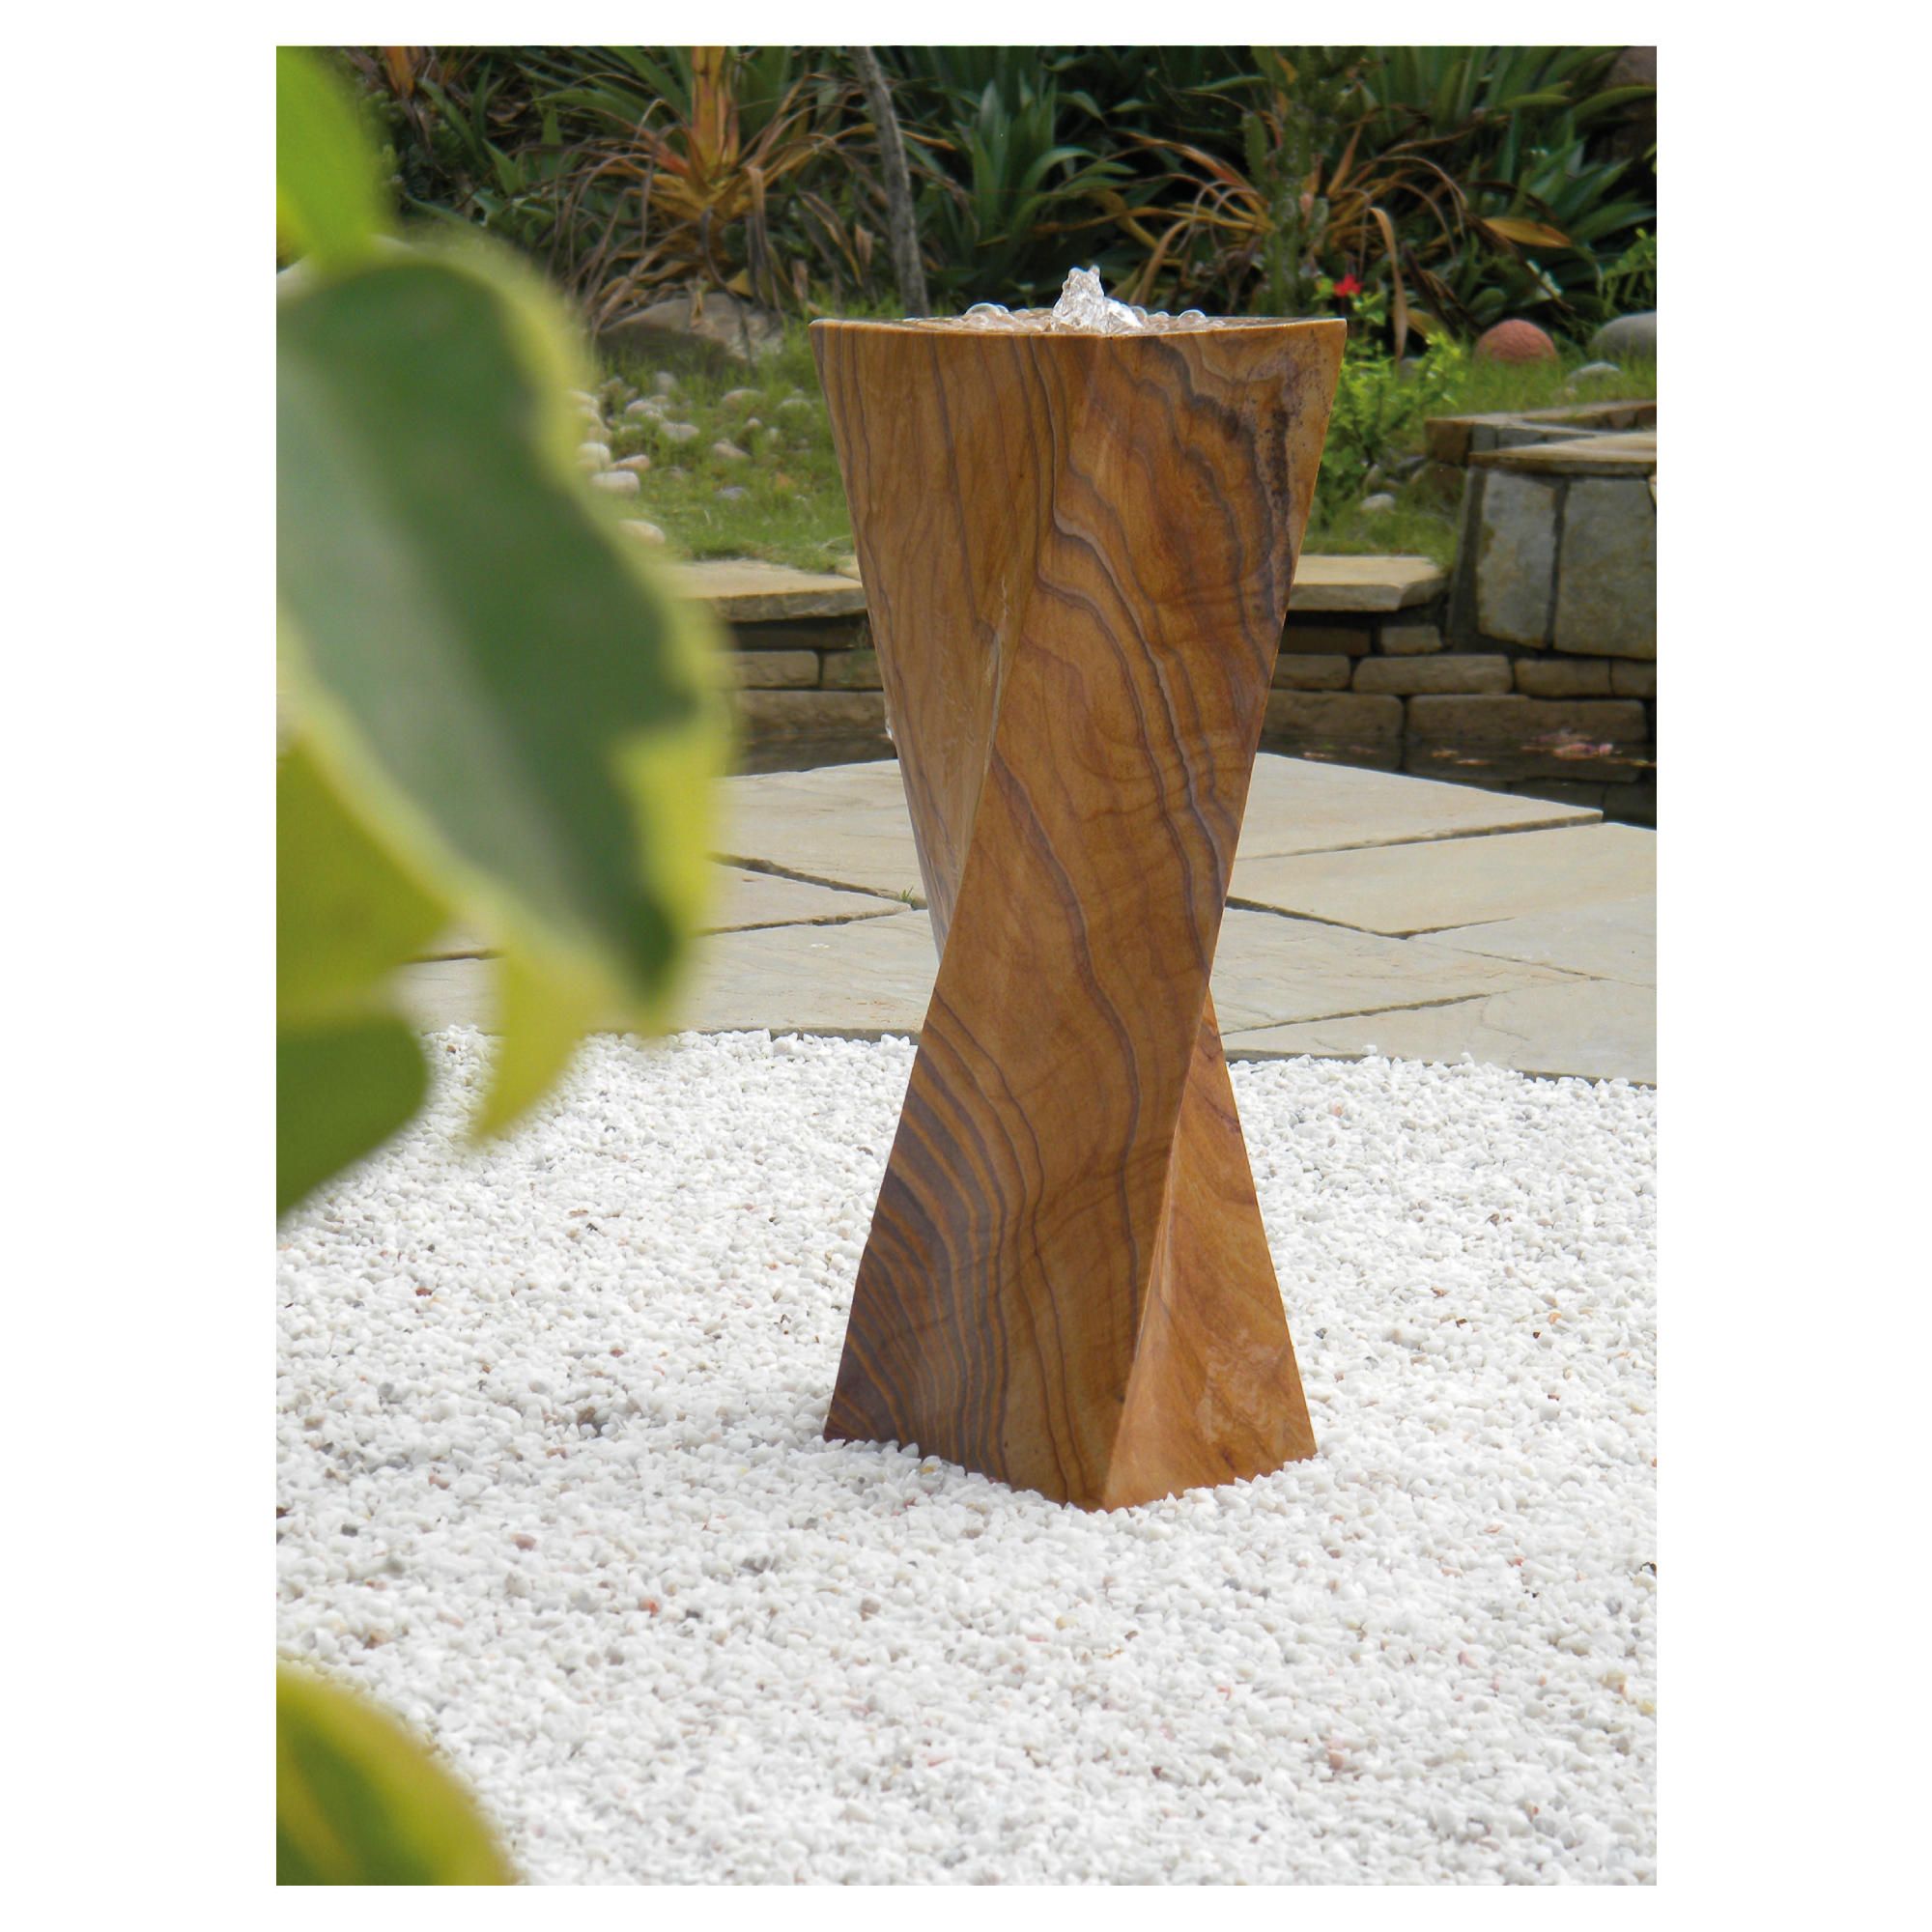 Arduus Honed Rainbow Water Feature 40cm at Tesco Direct